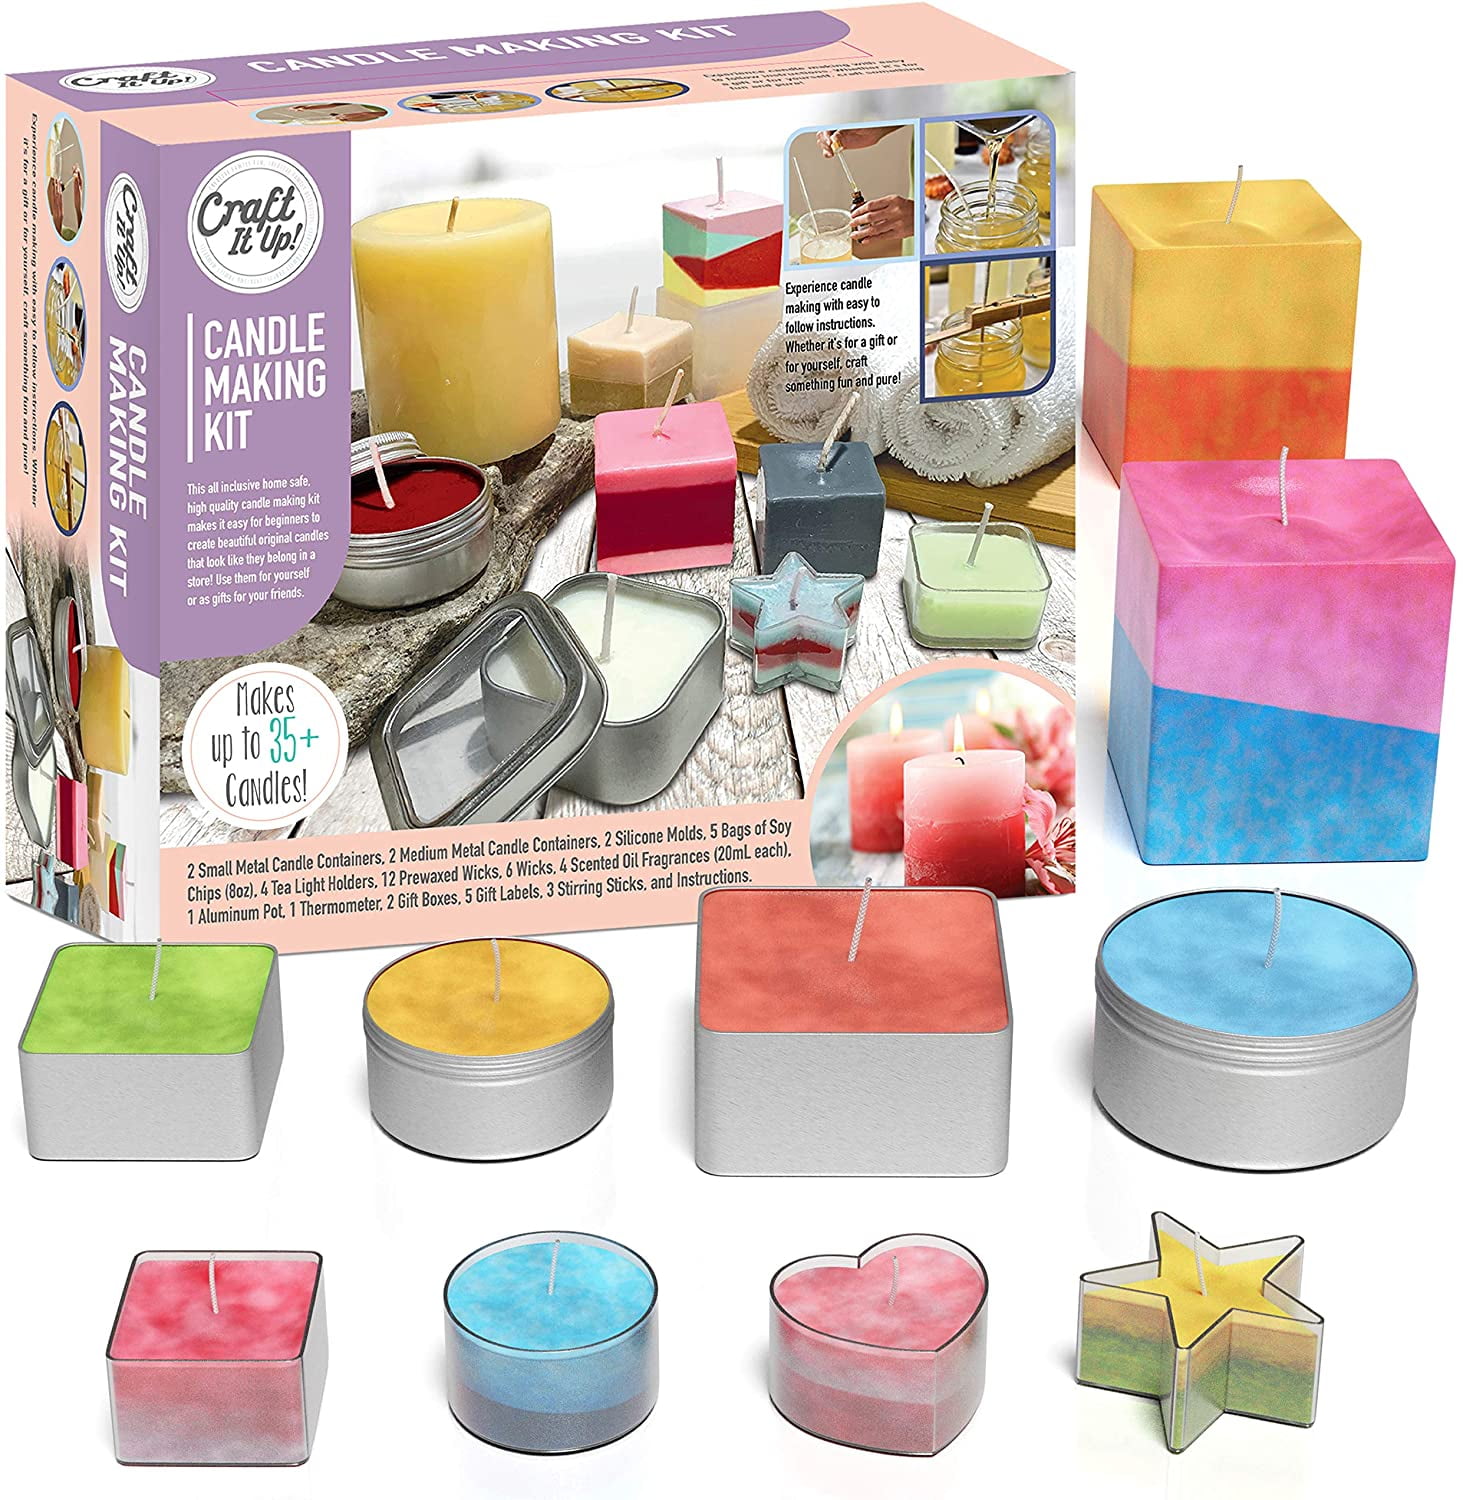 Beginners Candle Making Kit SALE